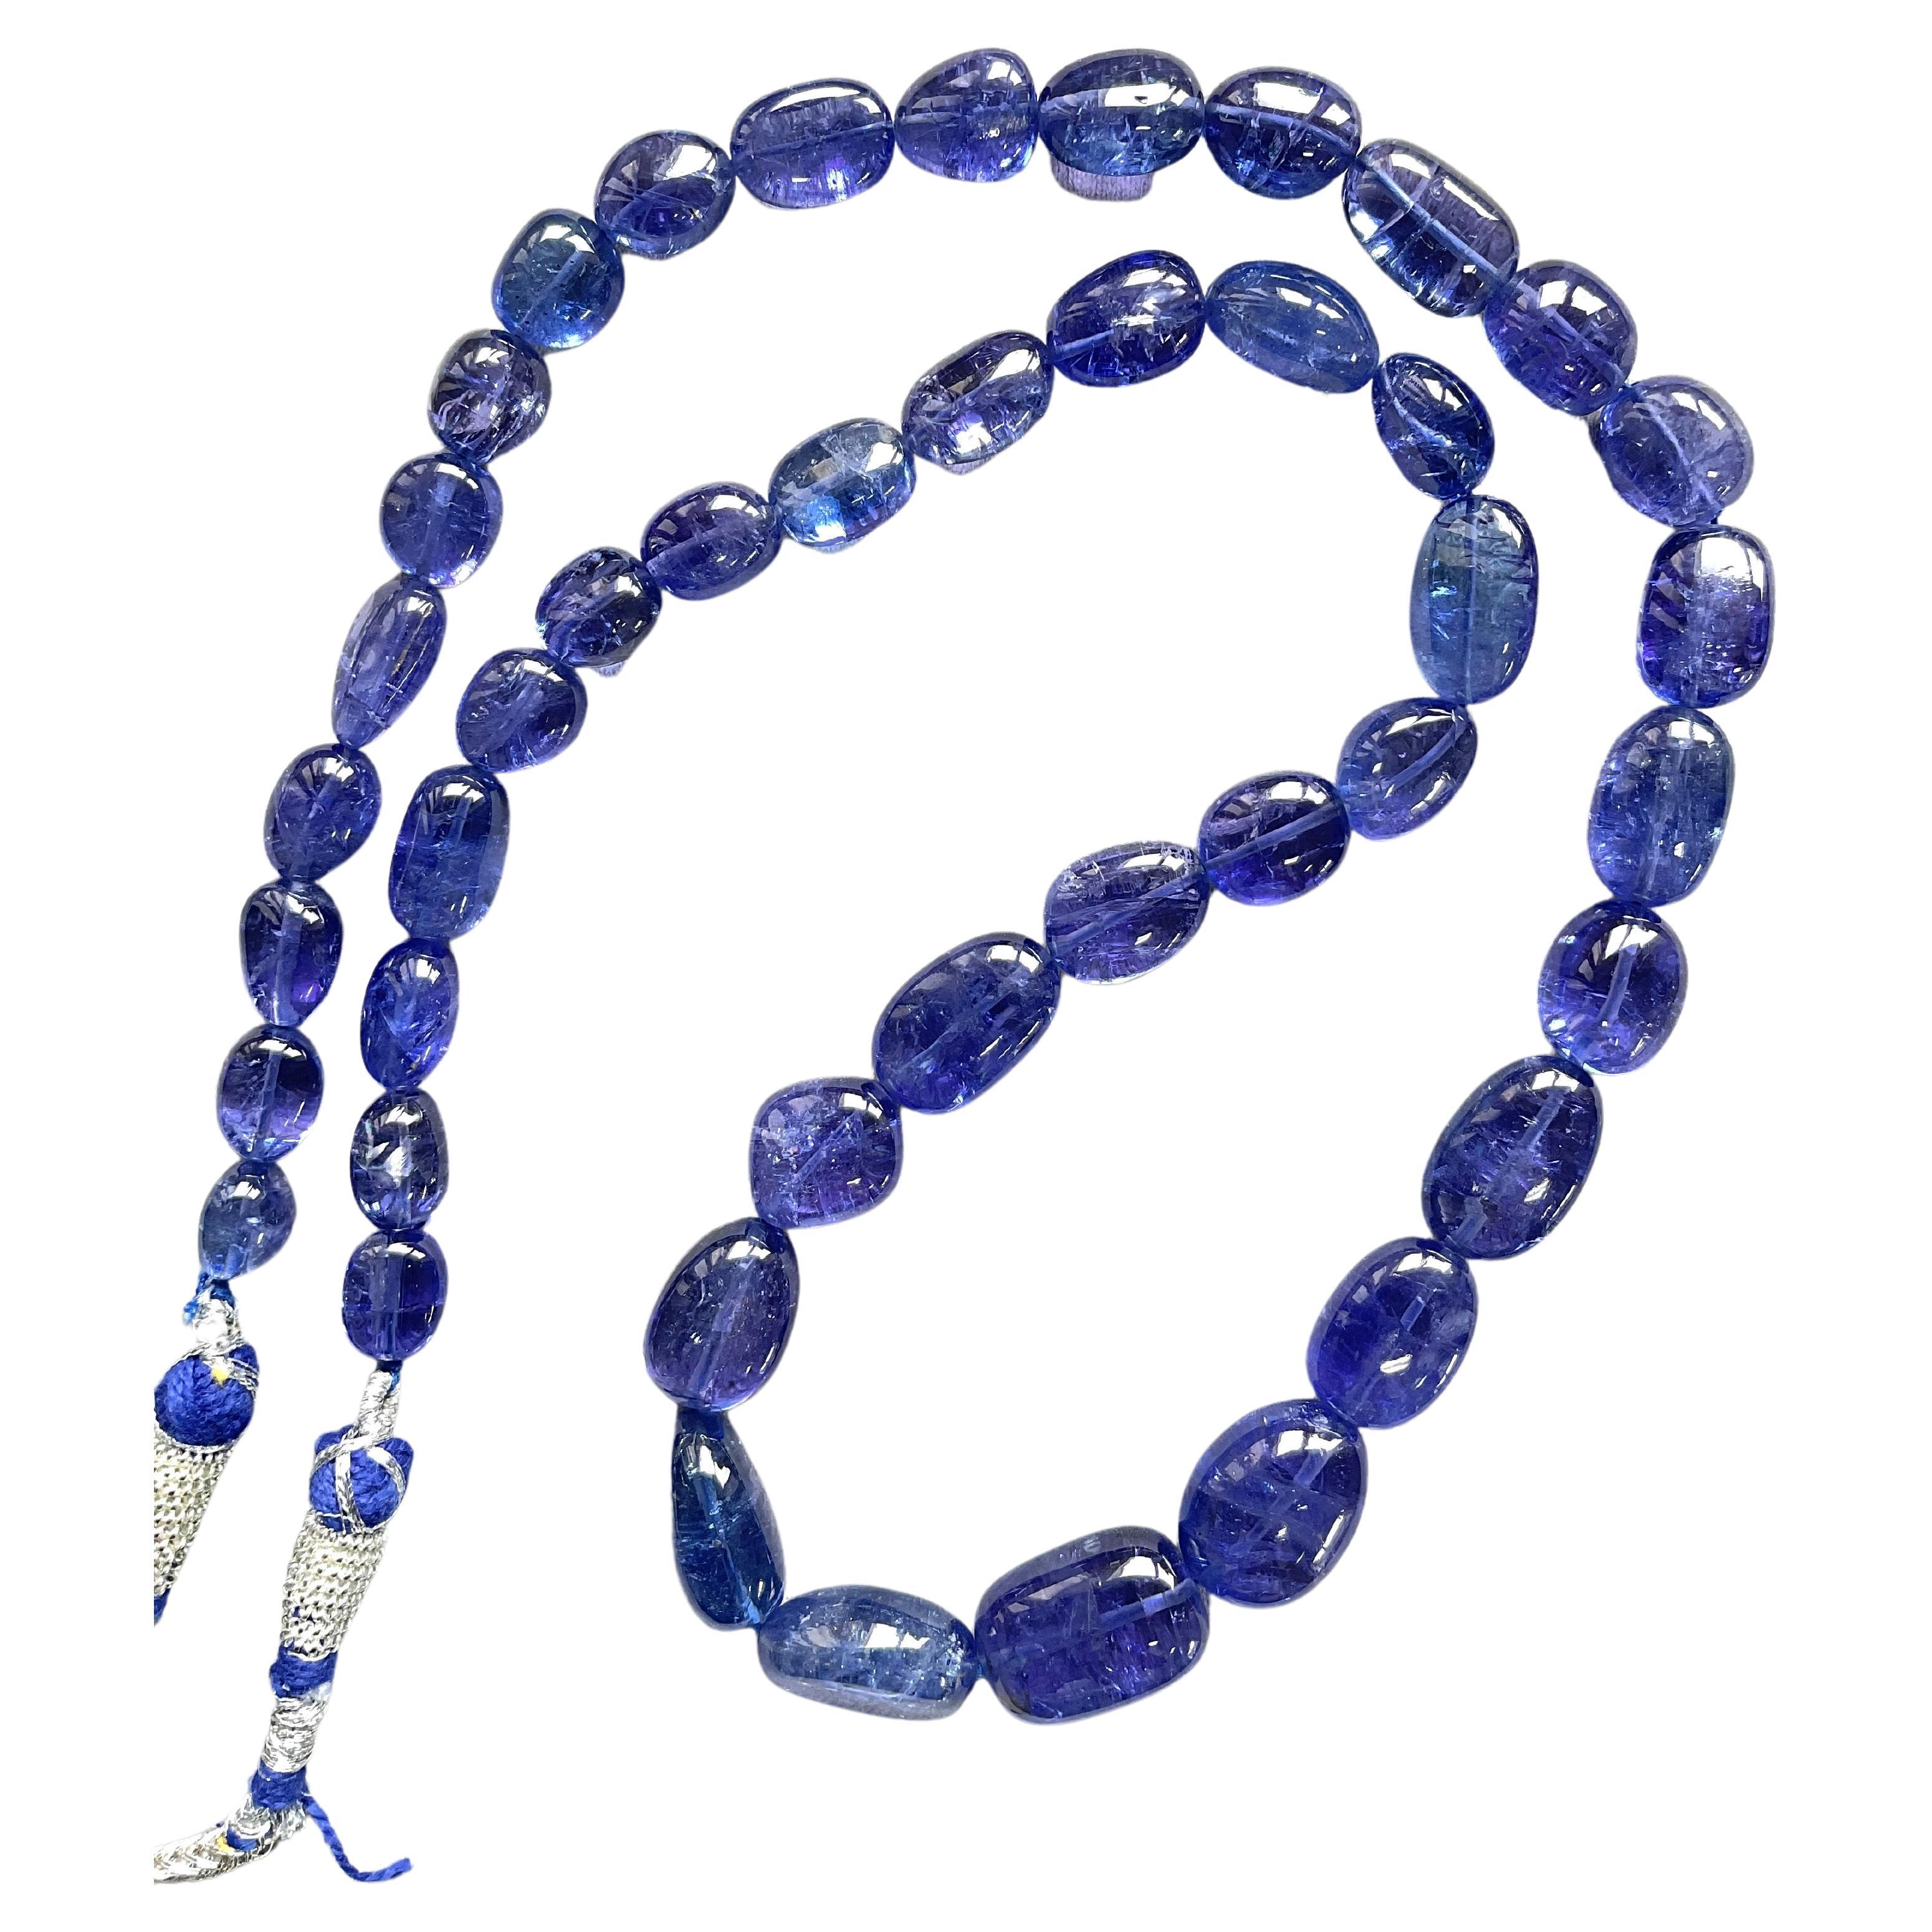 461.15 Carats Tanzanite Top Quality Tumbled necklace Fine Jewelry Natural Gems For Sale